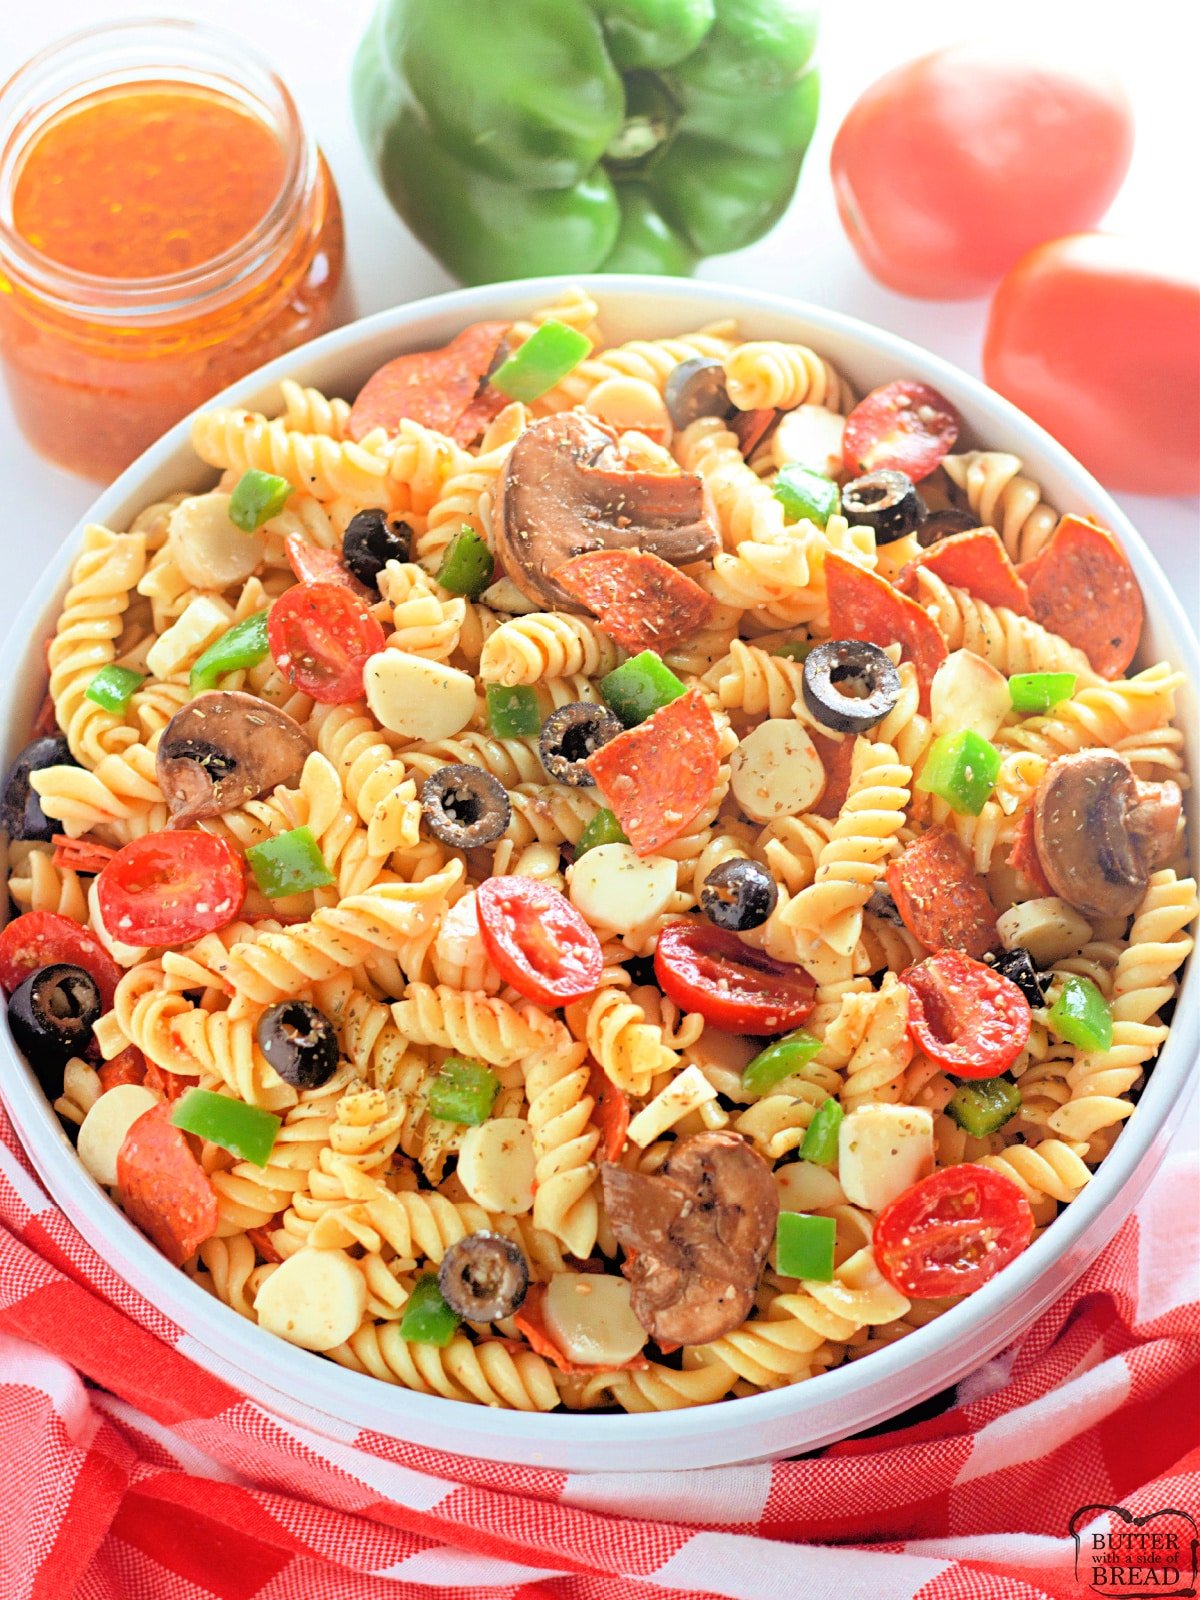 Cold pasta salad recipe with tomatoes, pepperoni, mozzarella, olives and peppers